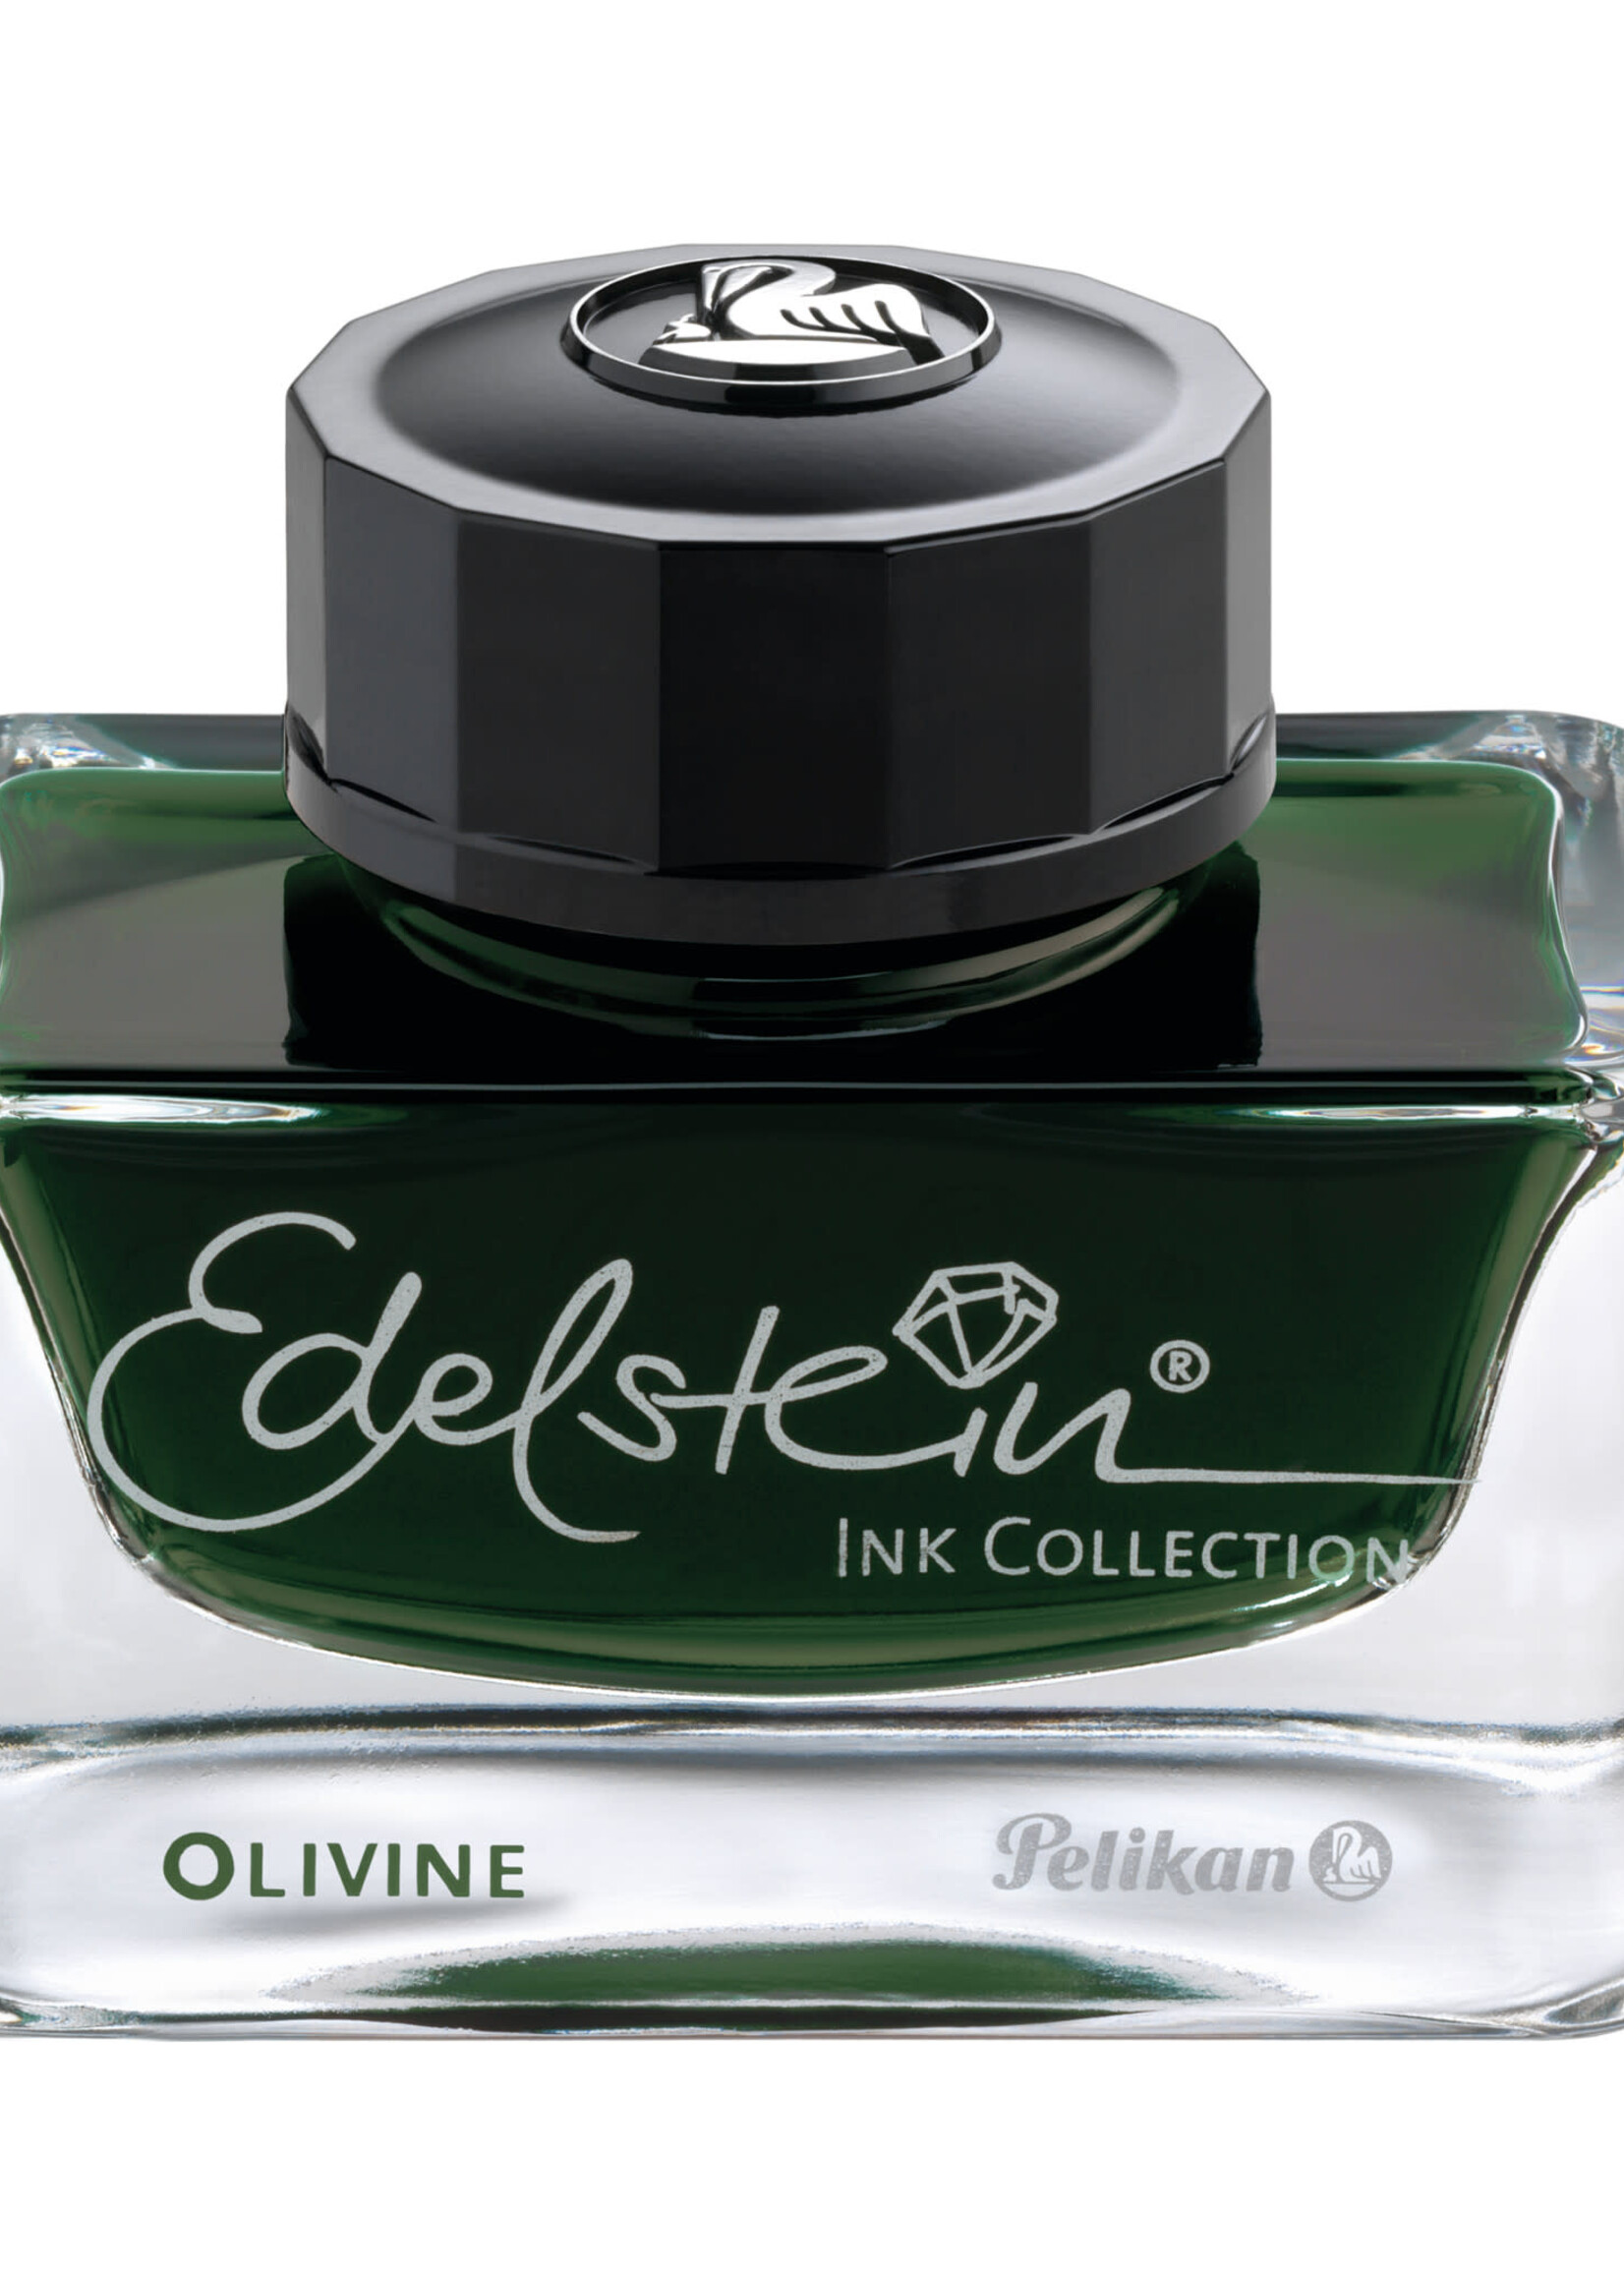 Pelikan Edelstein® Ink Collection Ink of the year 2018 – Olivine